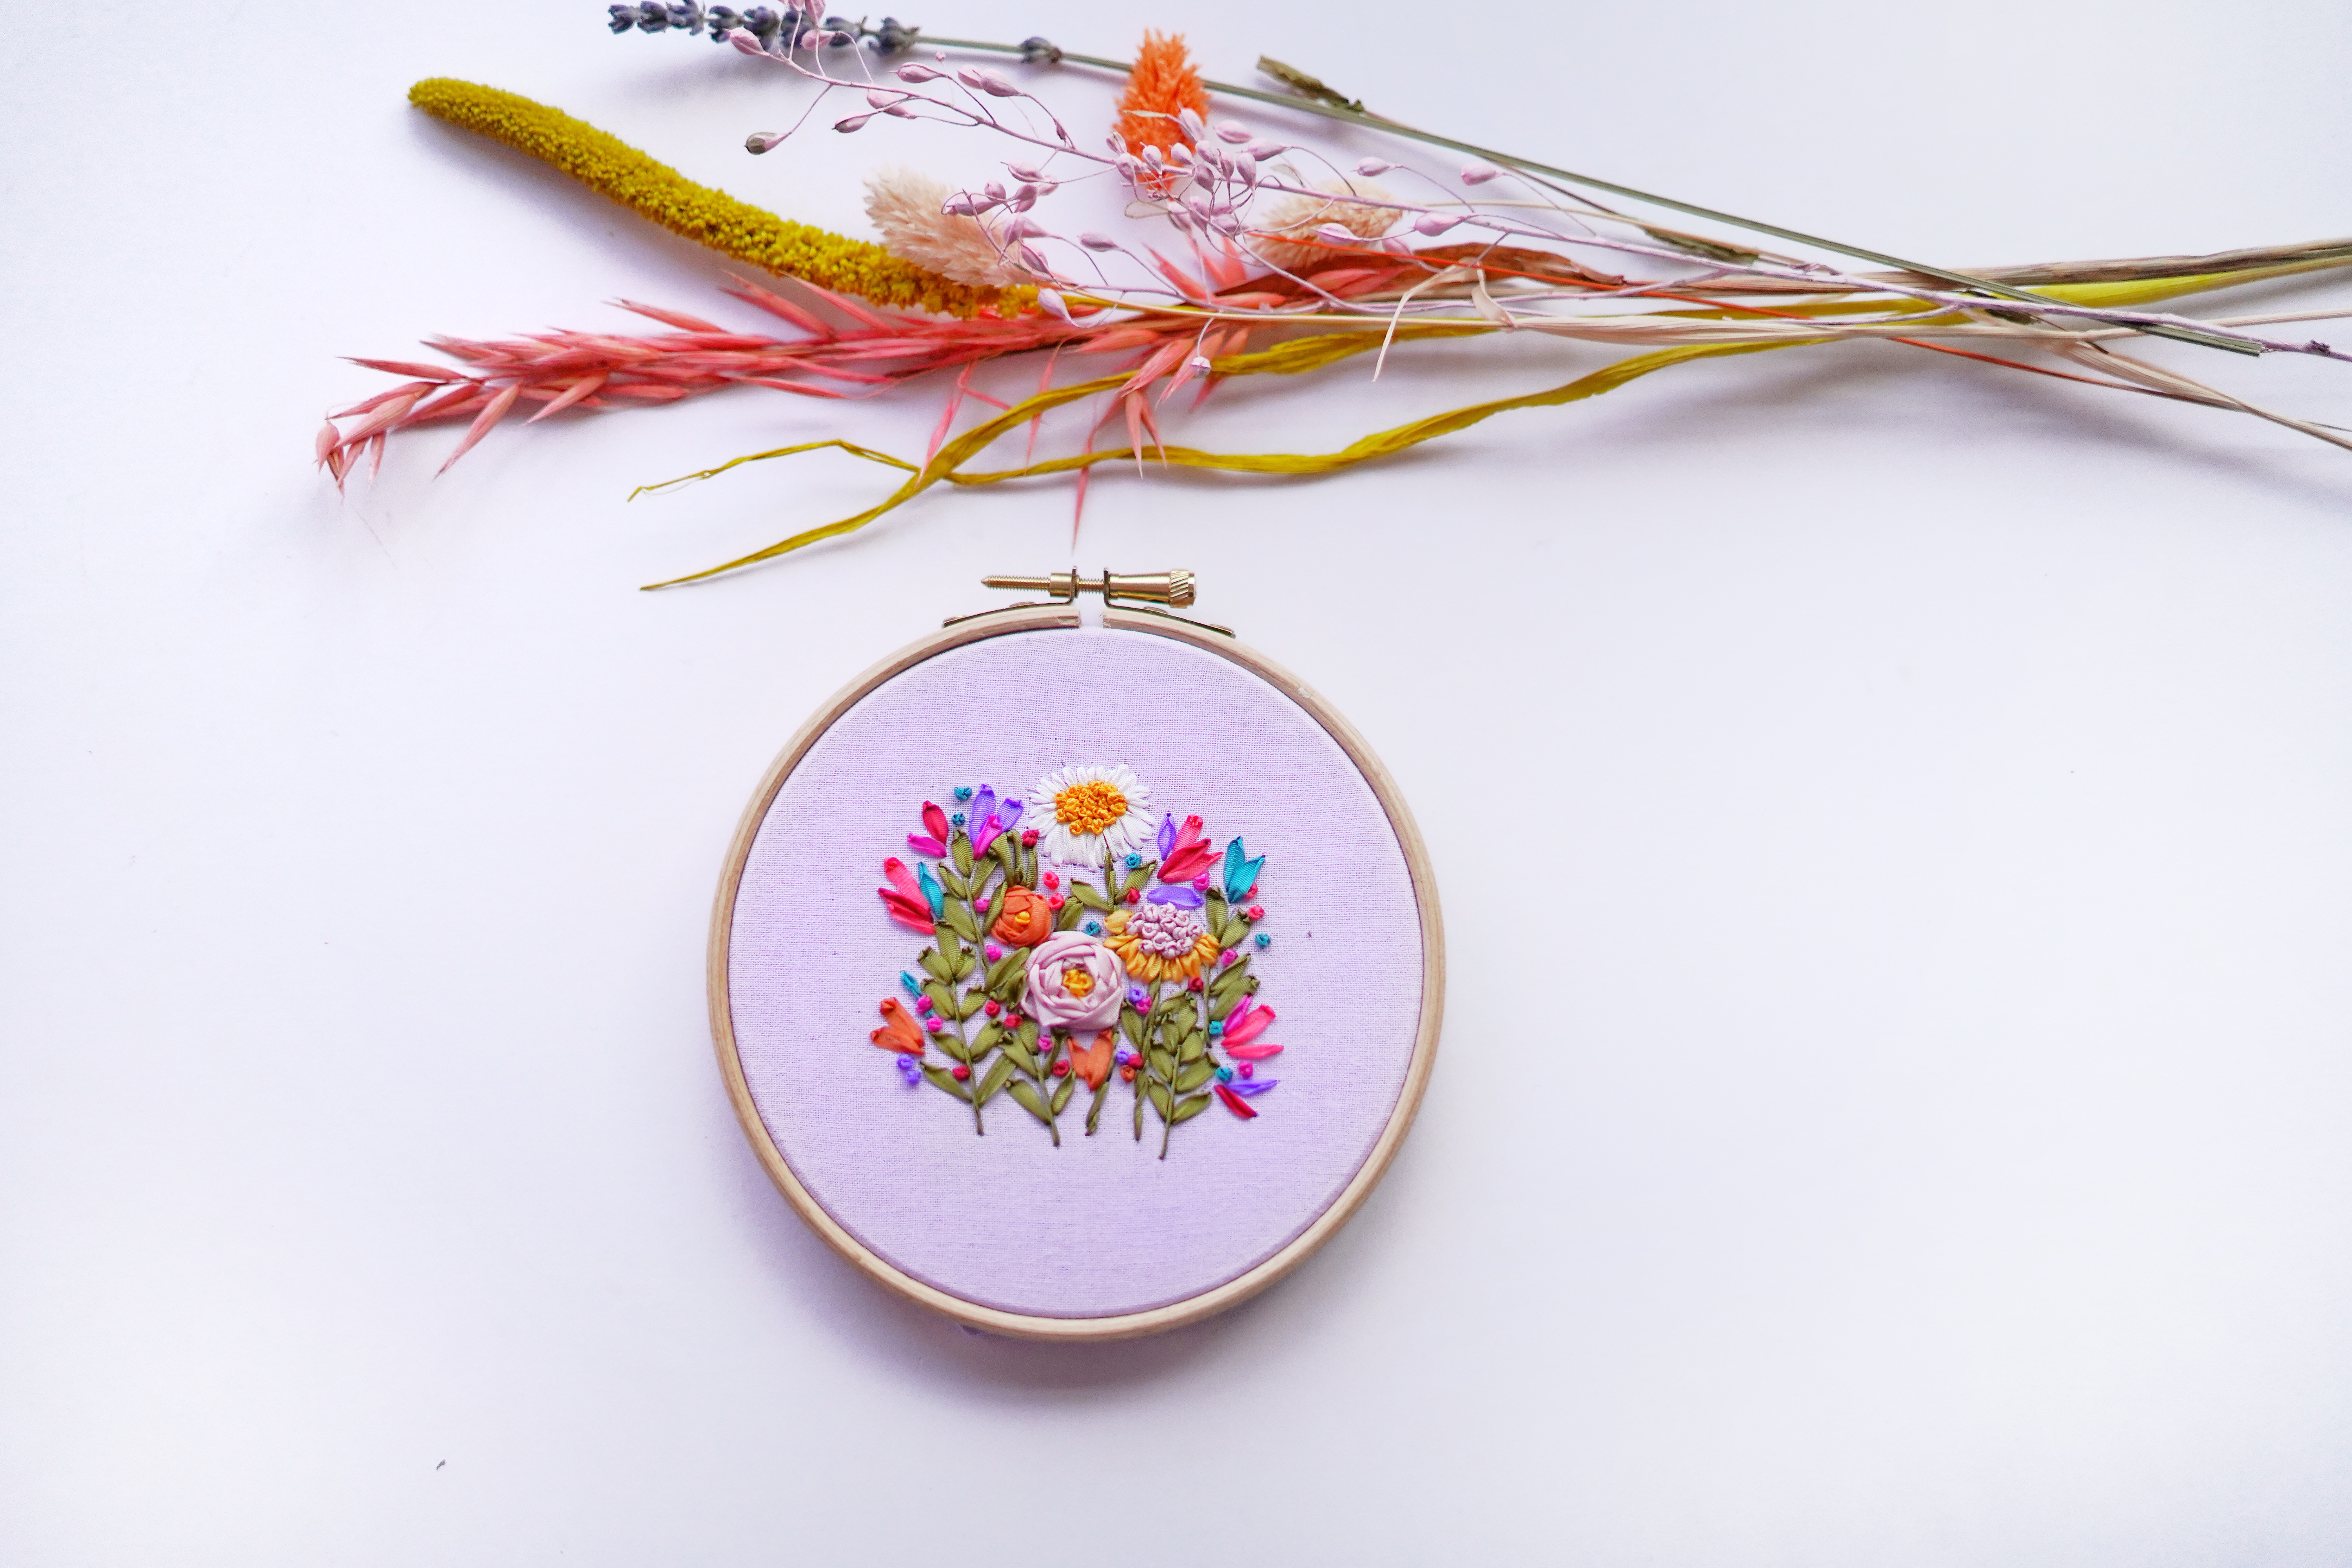 Transfer Embroidery designs on Fabric (10 Best ways) - SewGuide